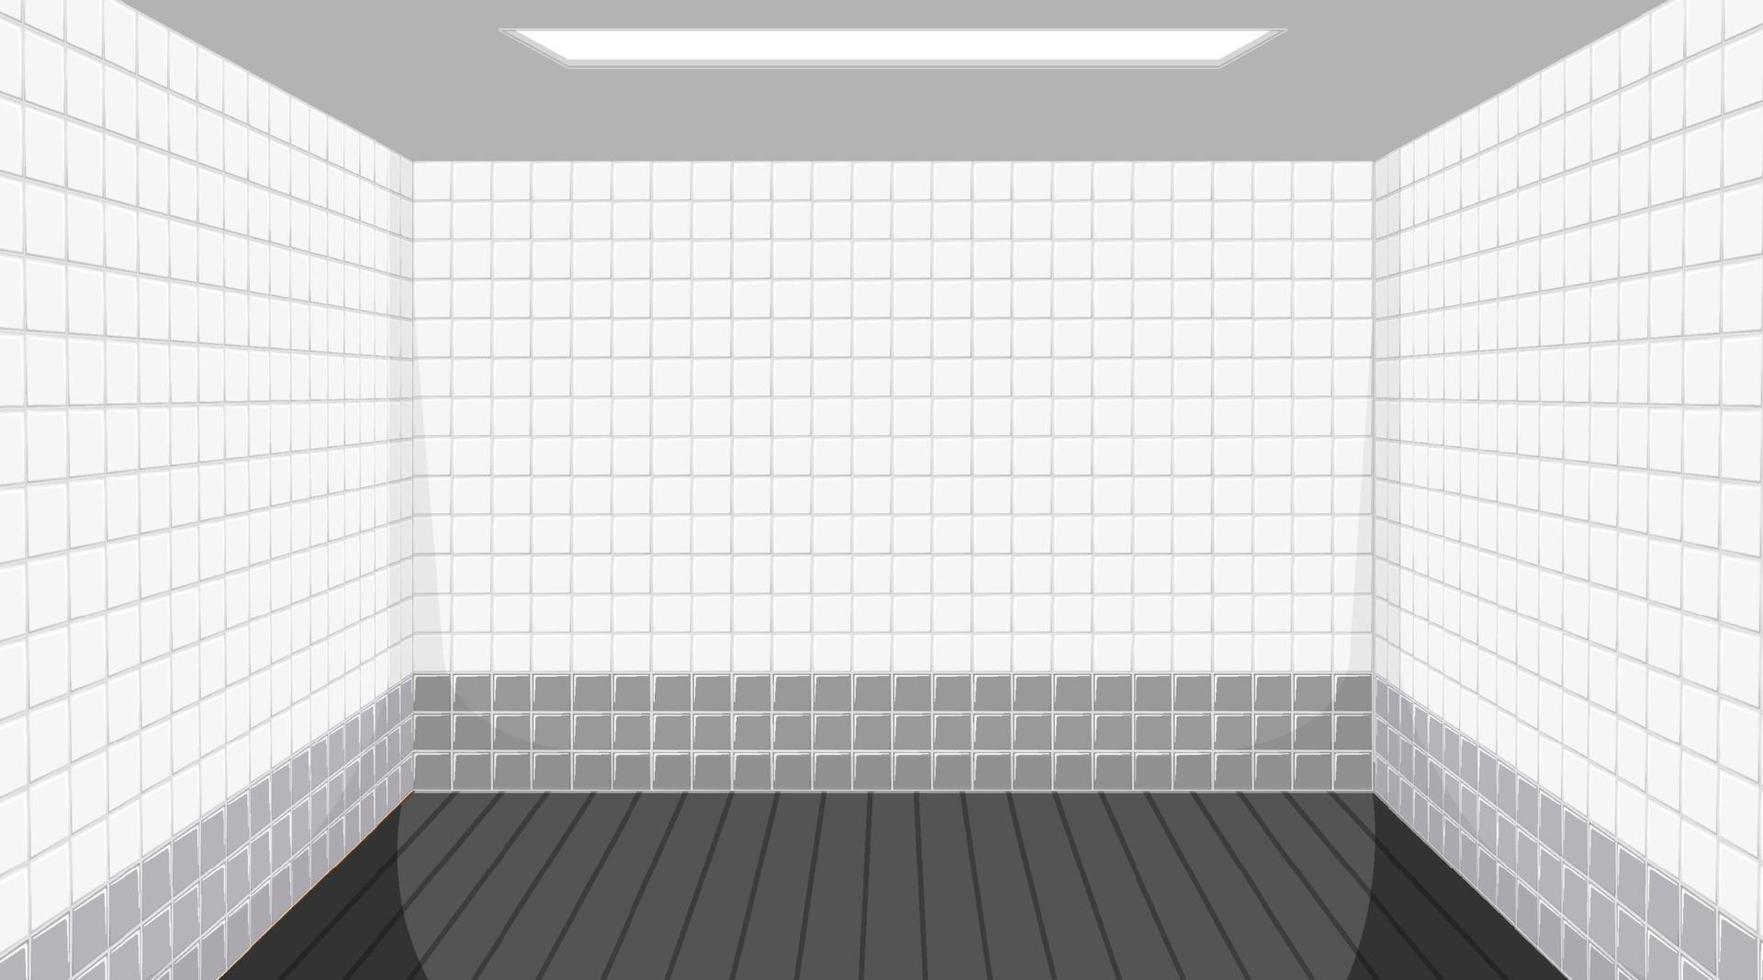 Empty room with black floor and white tiles walls vector